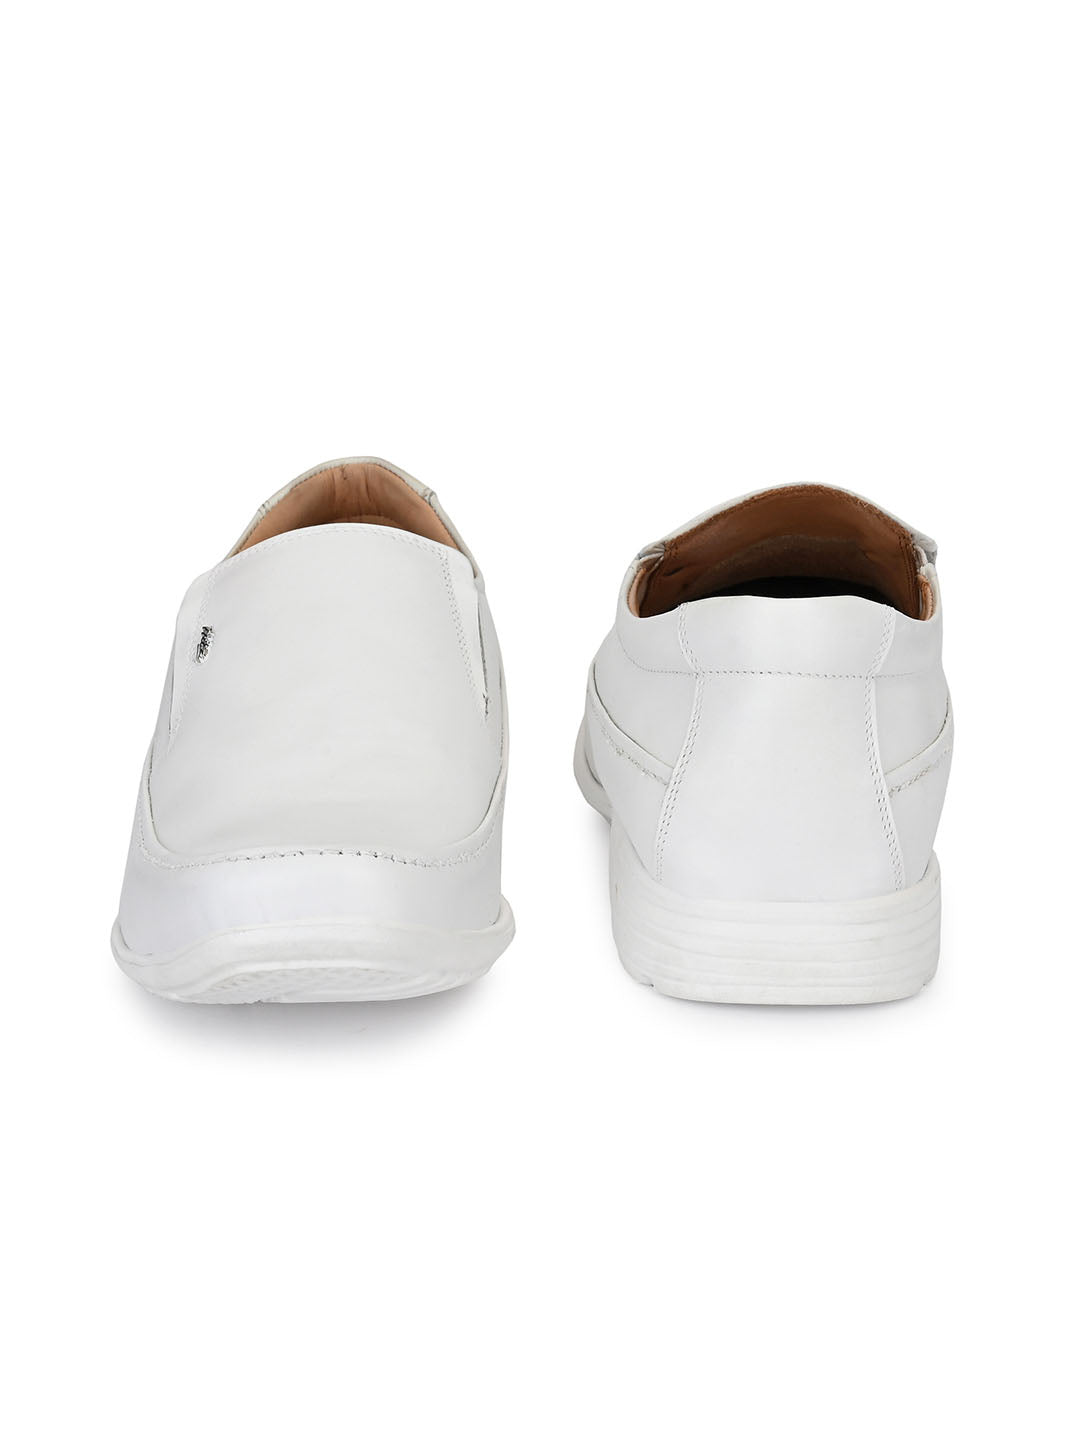 Pro White Sneakers Casual Shoe for Women